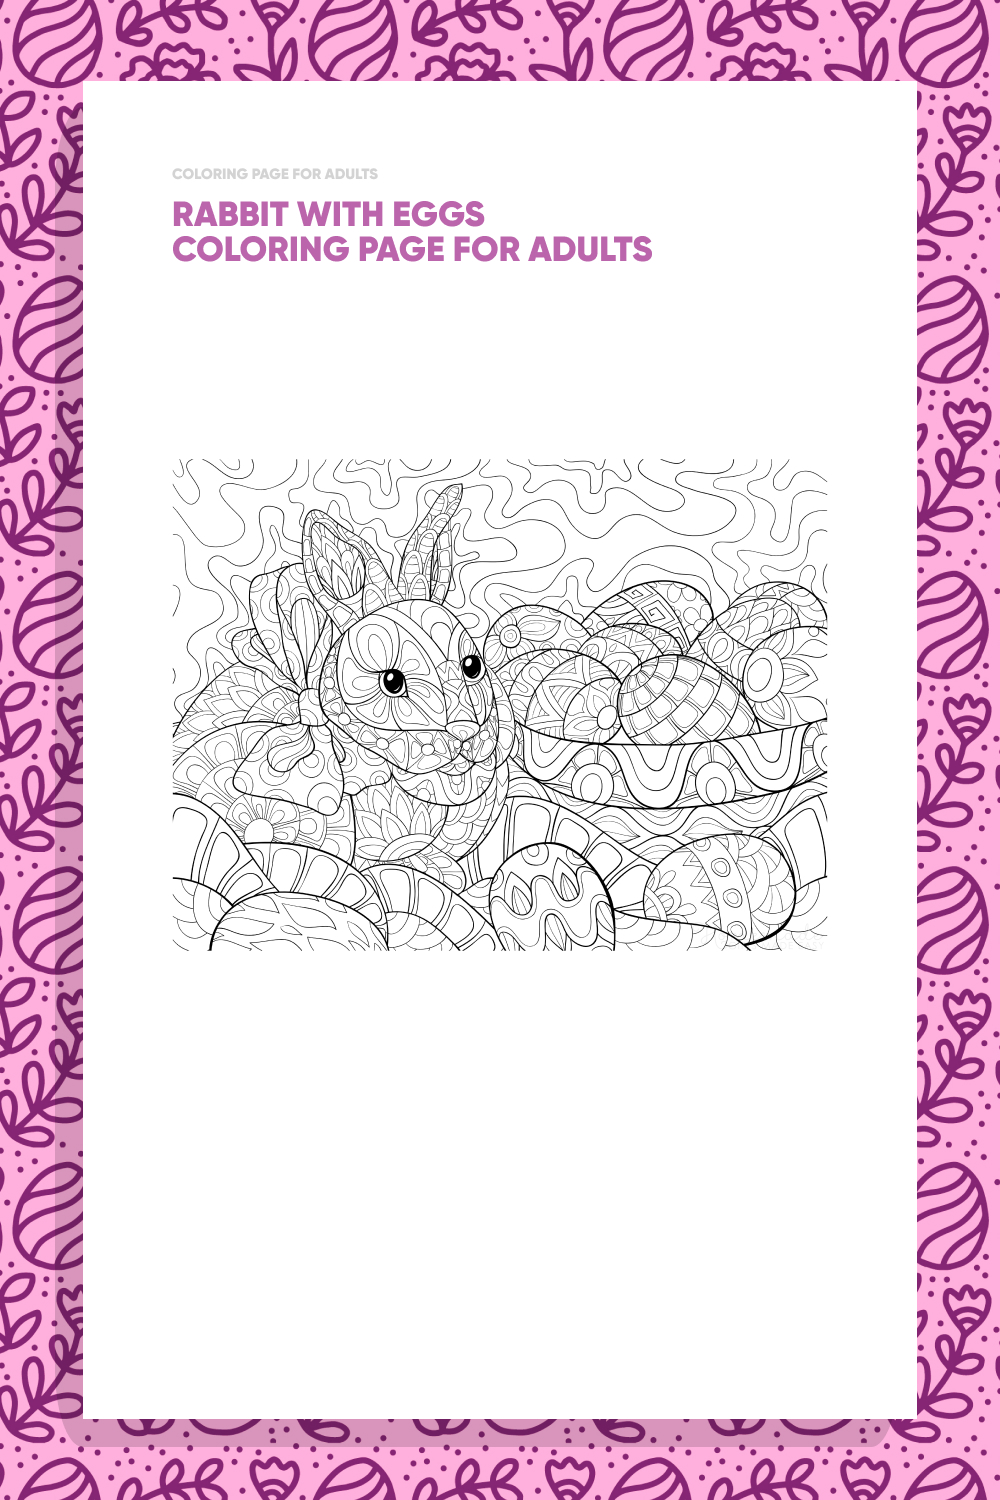 Rabbit with Eggs Coloring Page for Adults